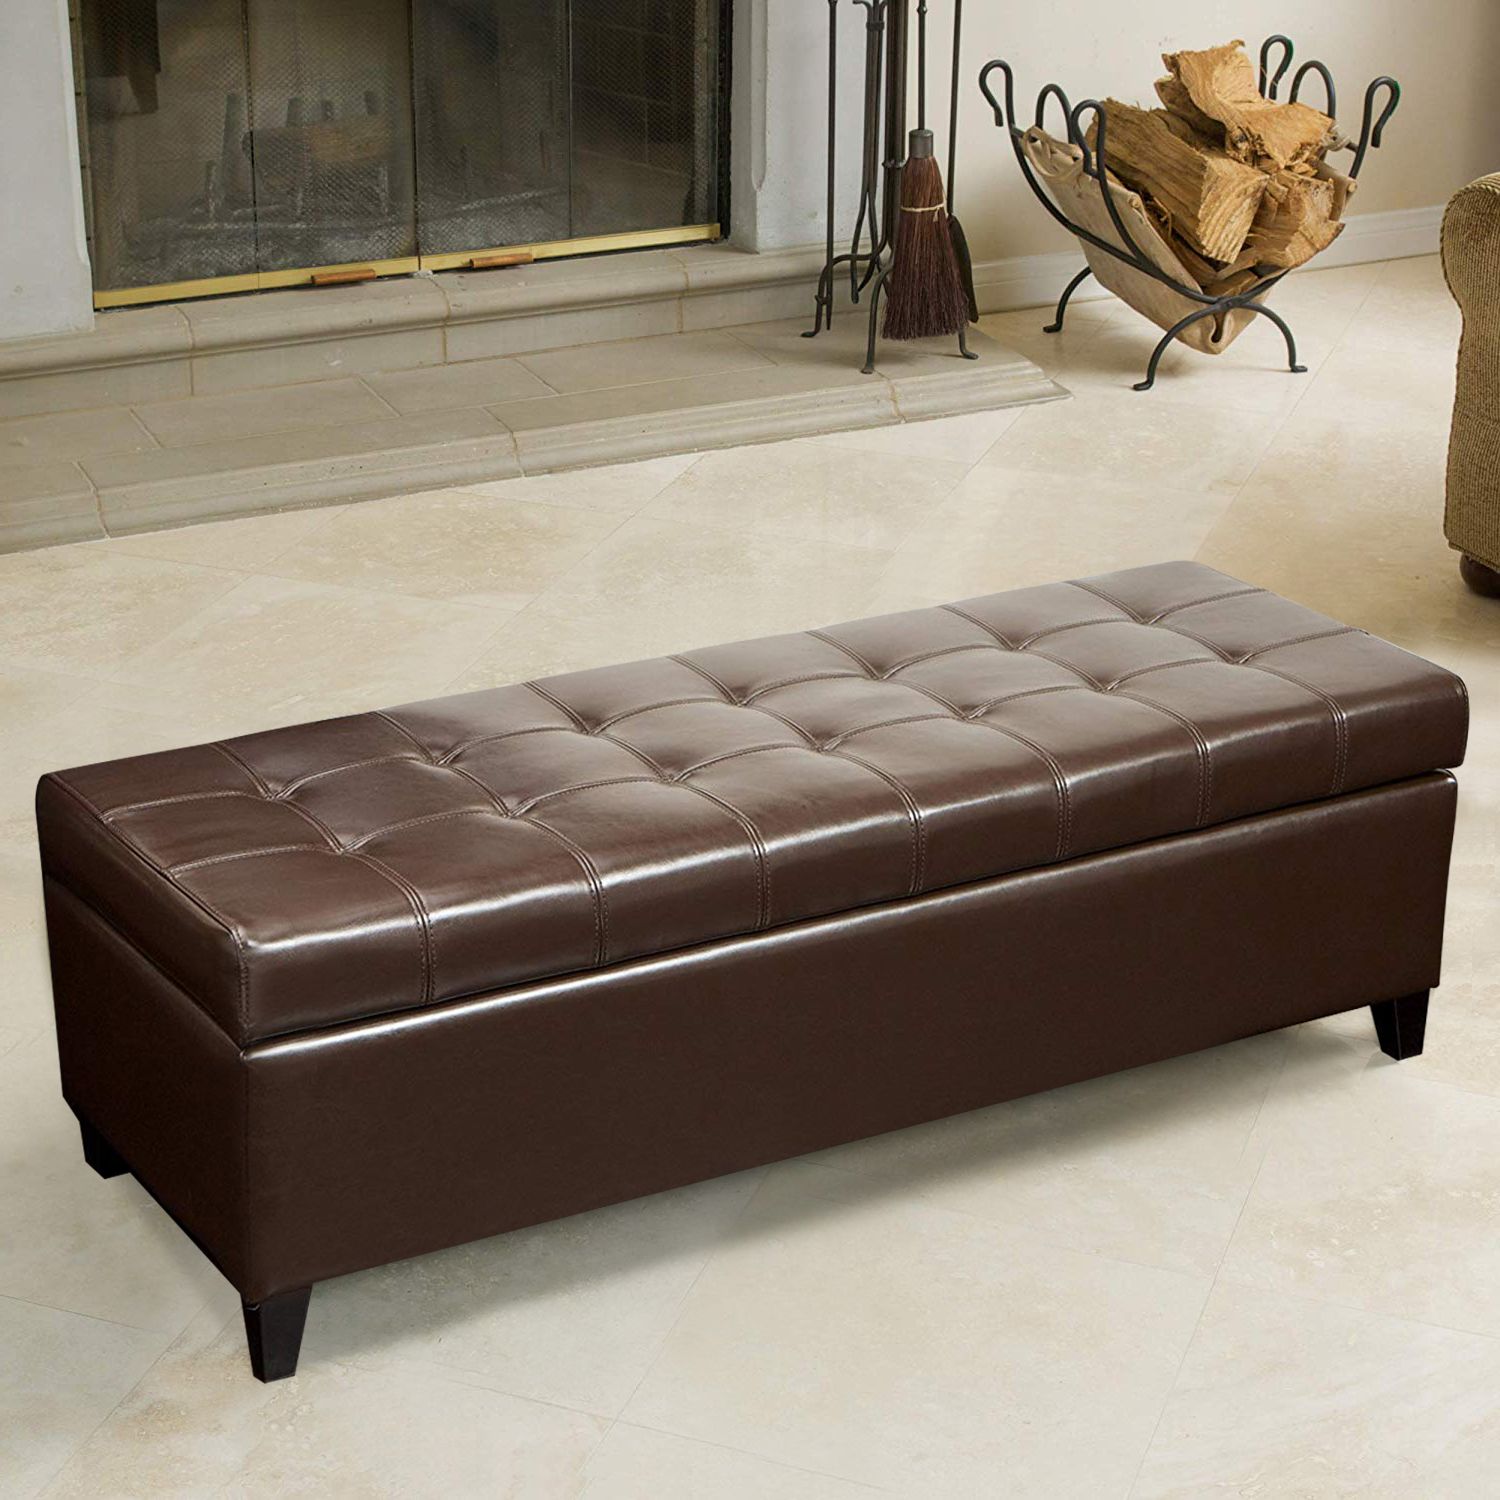 Joveco Leather Accents Rectangular Tufted Storage Ottoman Footstool Within Espresso Leather And Tan Canvas Pouf Ottomans (View 3 of 20)